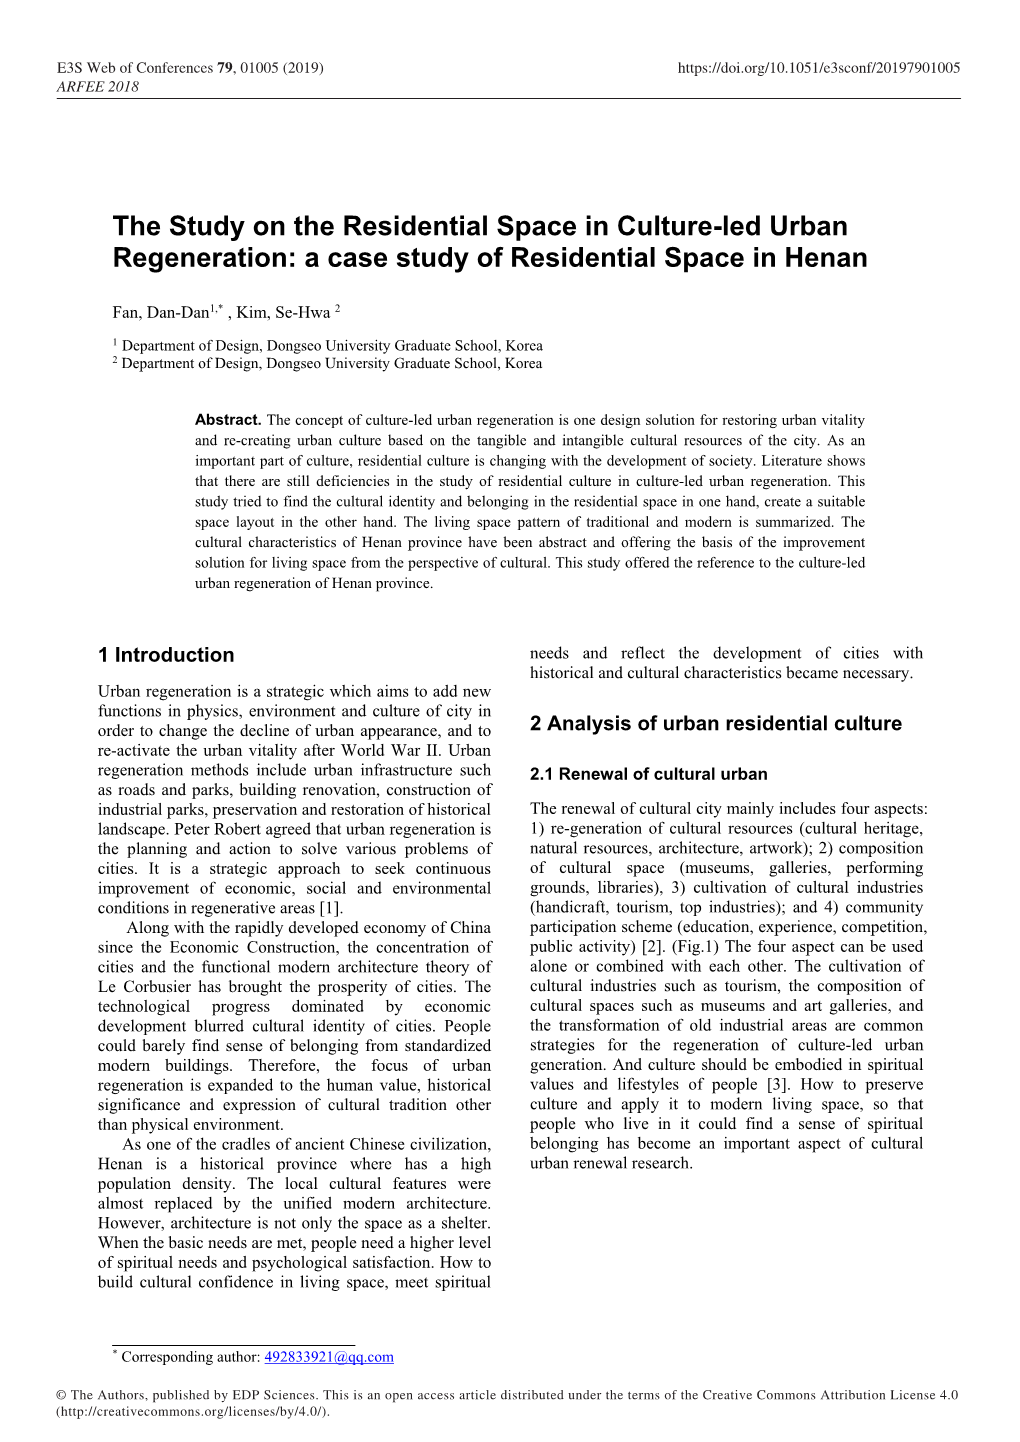 The Study on the Residential Space in Culture-Led Urban Regeneration: a Case Study of Residential Space in Henan